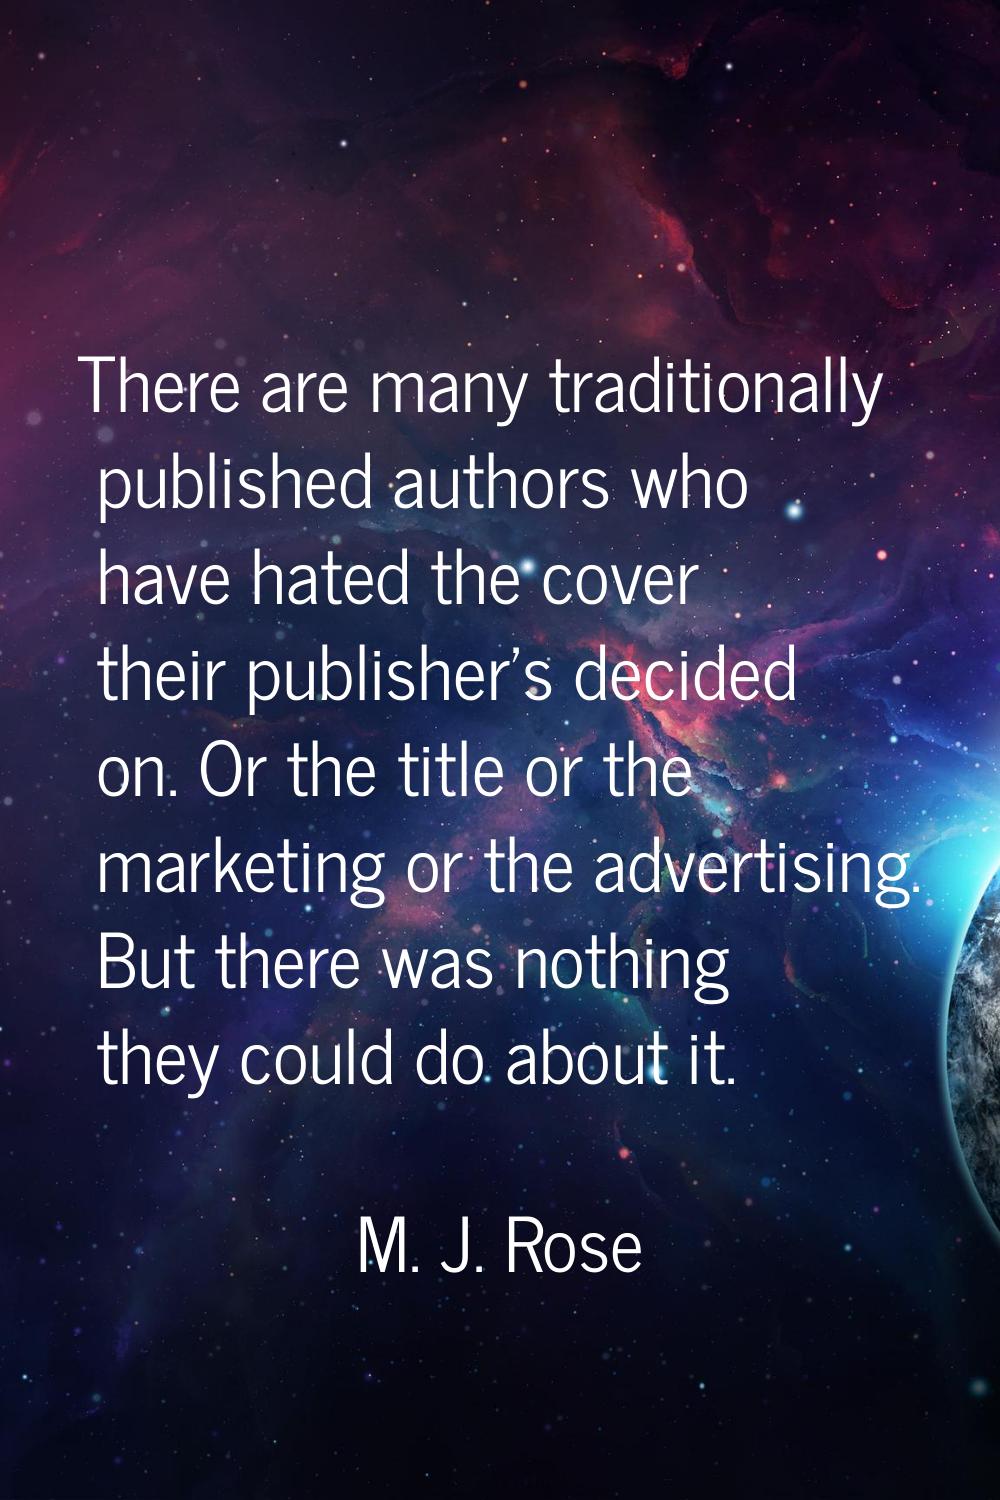 There are many traditionally published authors who have hated the cover their publisher's decided o